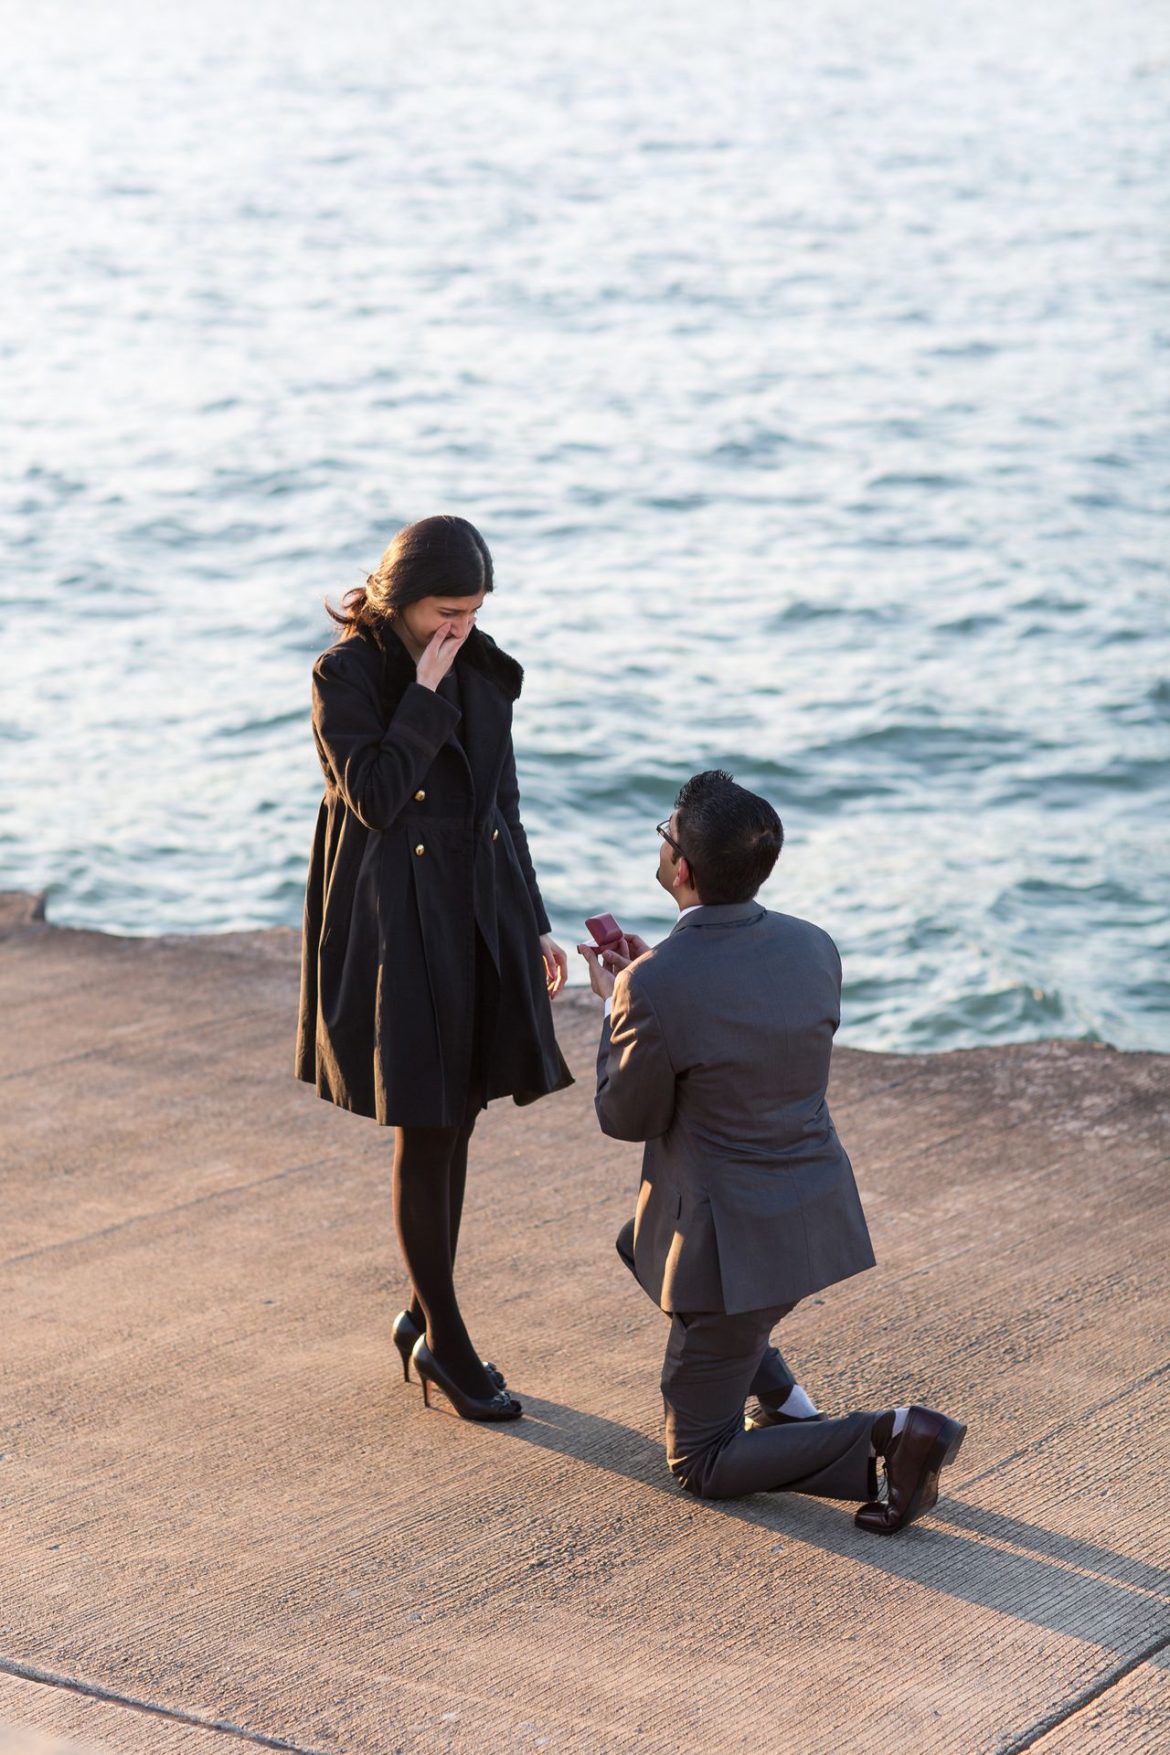 Wedding Photography Trends | Shooting The Proposal